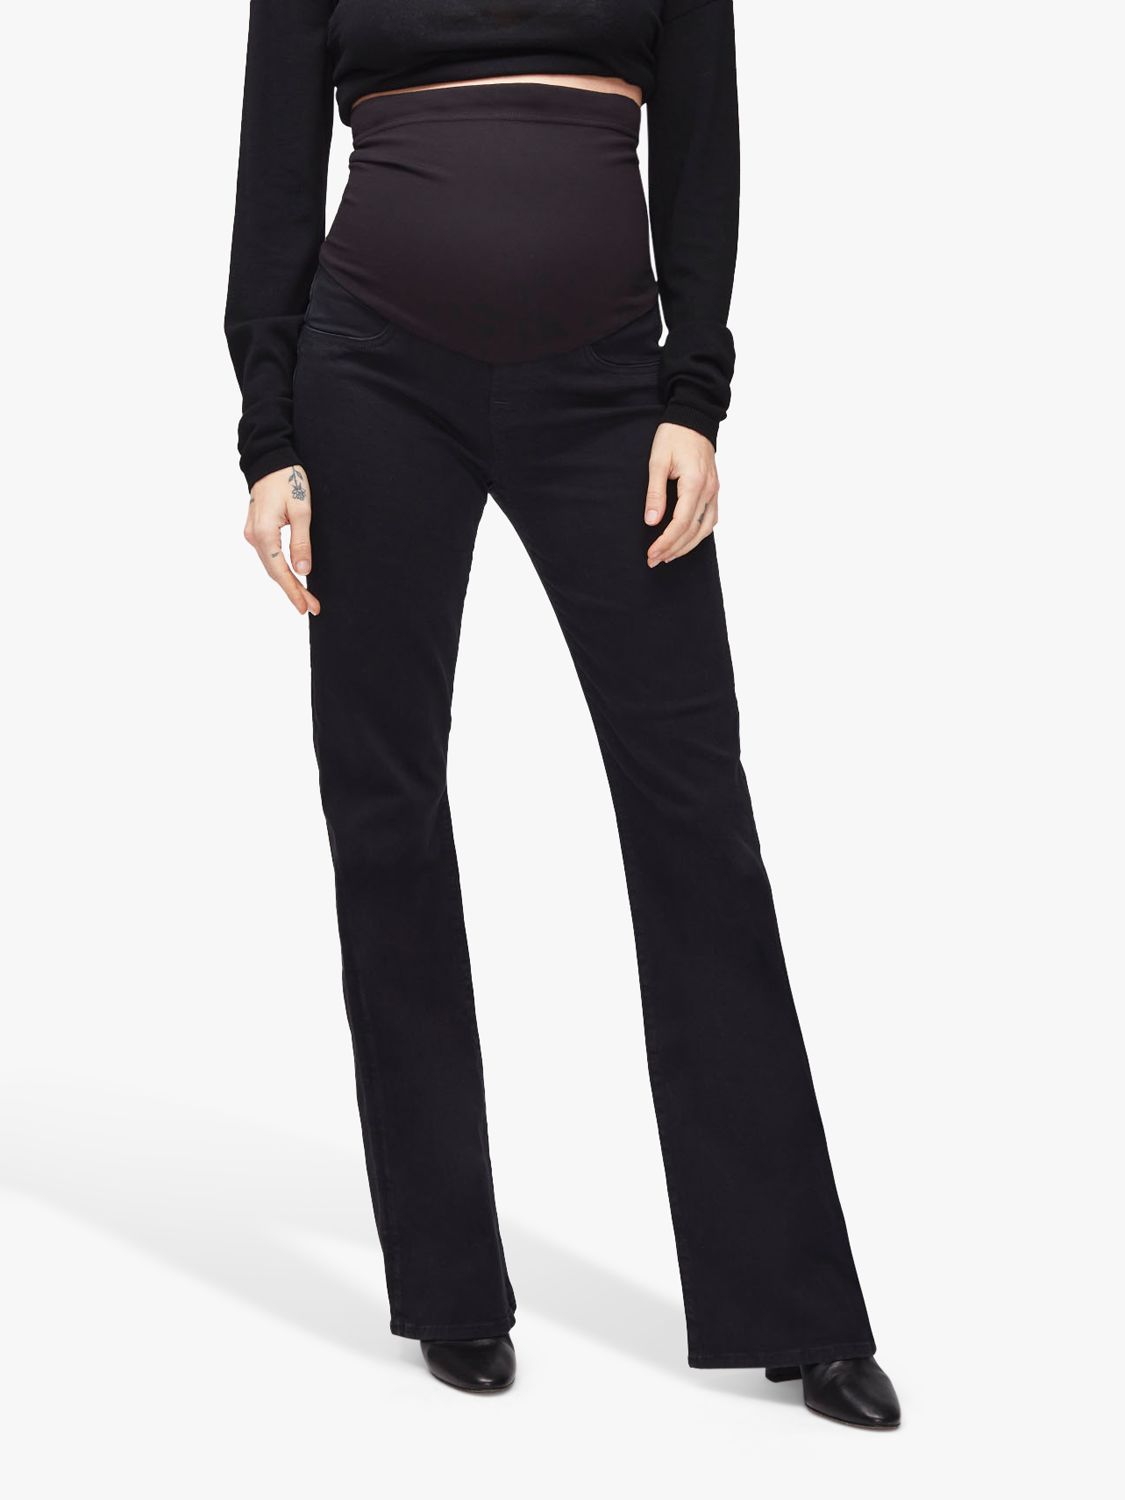 7 For All Mankind Bootcut Maternity Jeans, Black, 26